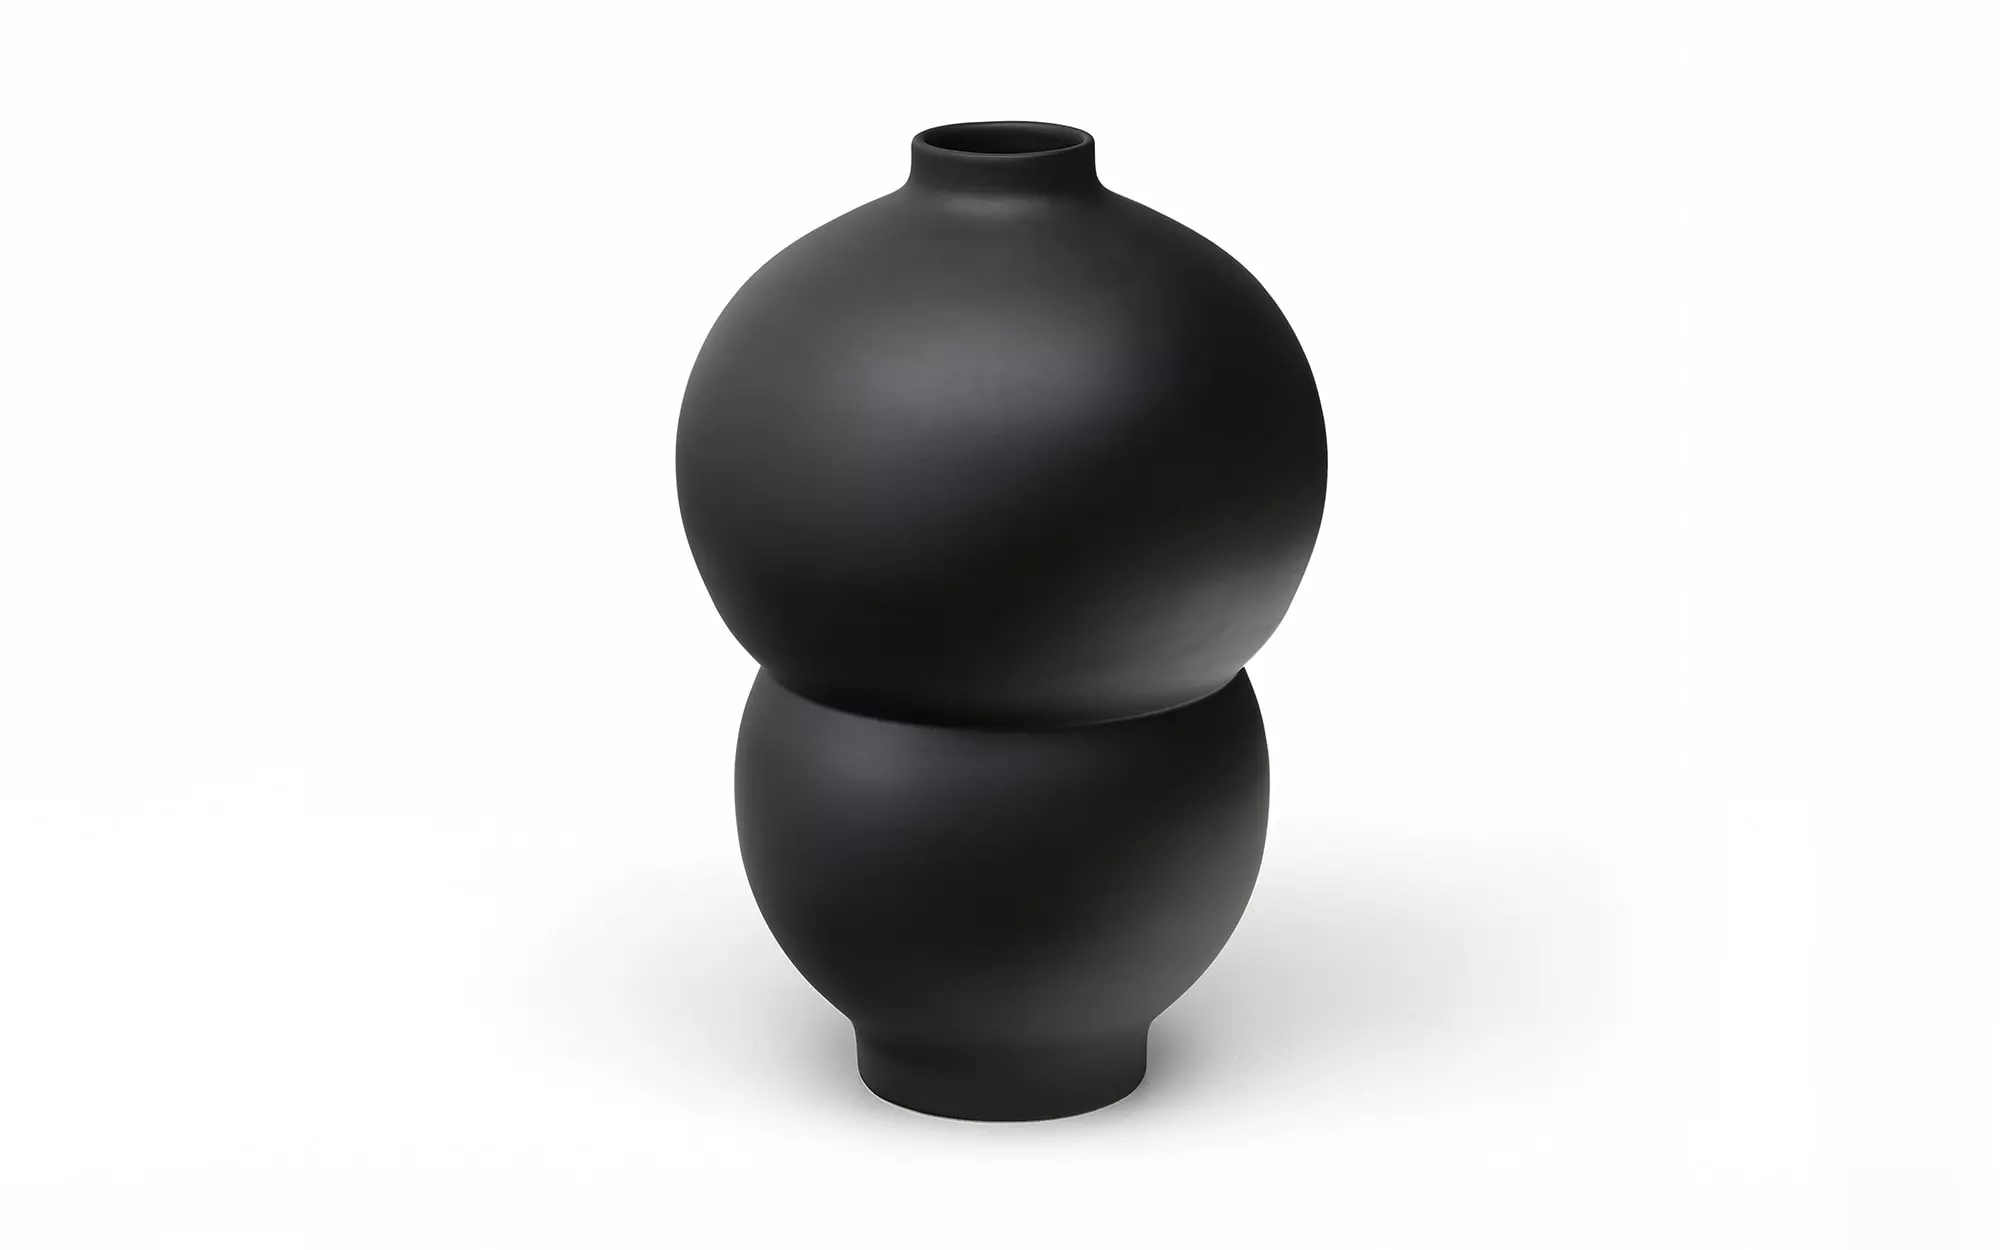 Plump - 2 Vase - Pierre Charpin - @home new chapter .